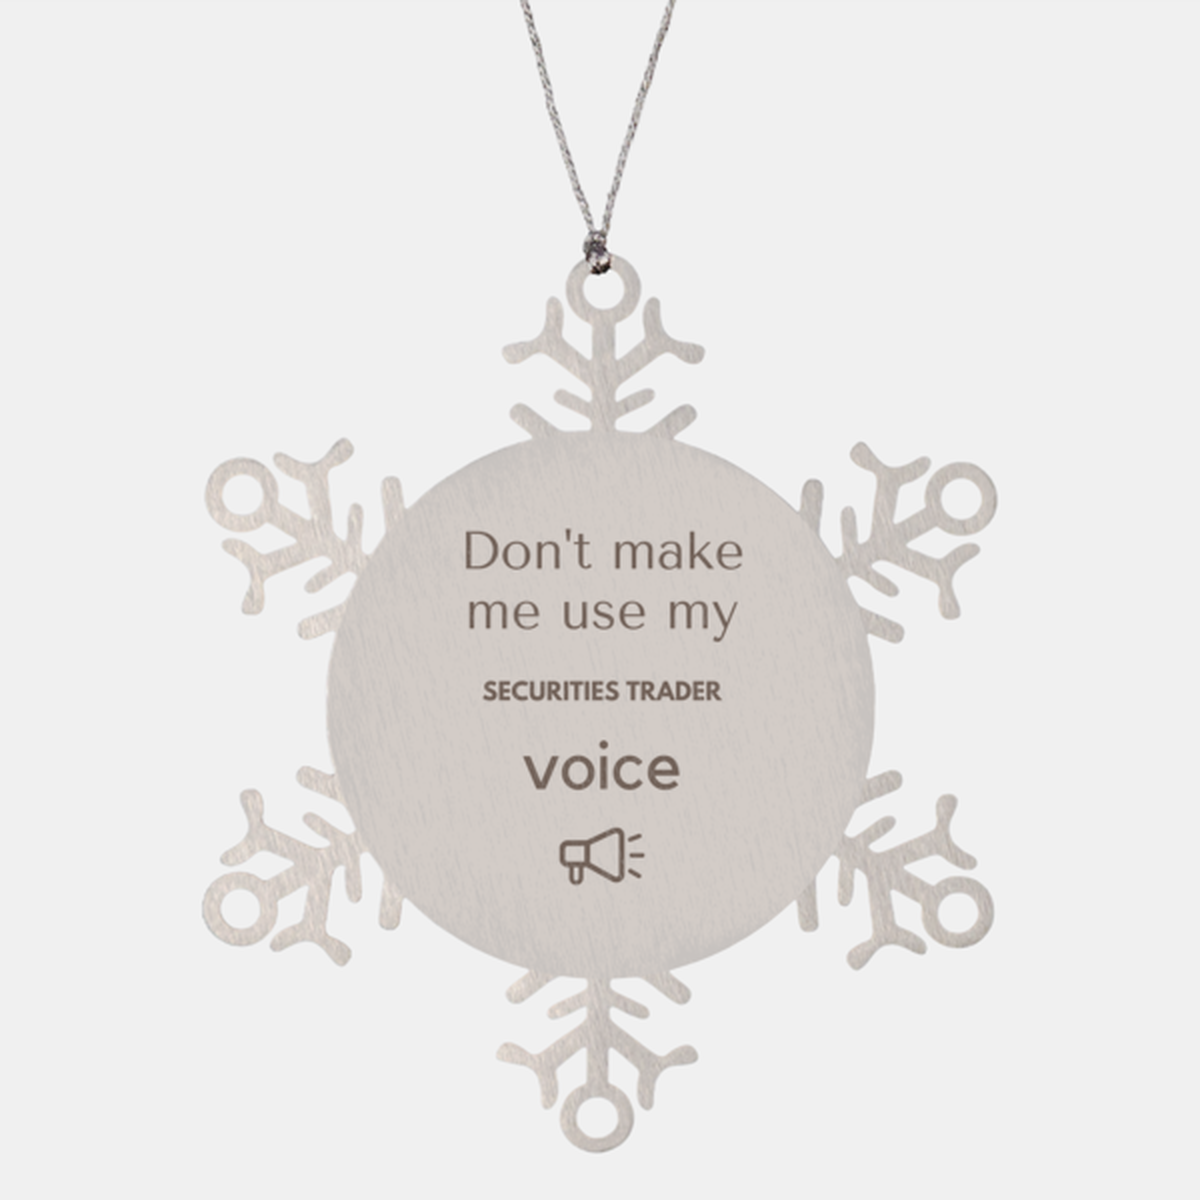 Don't make me use my Securities Trader voice, Sarcasm Securities Trader Ornament Gifts, Christmas Securities Trader Snowflake Ornament Unique Gifts For Securities Trader Coworkers, Men, Women, Colleague, Friends